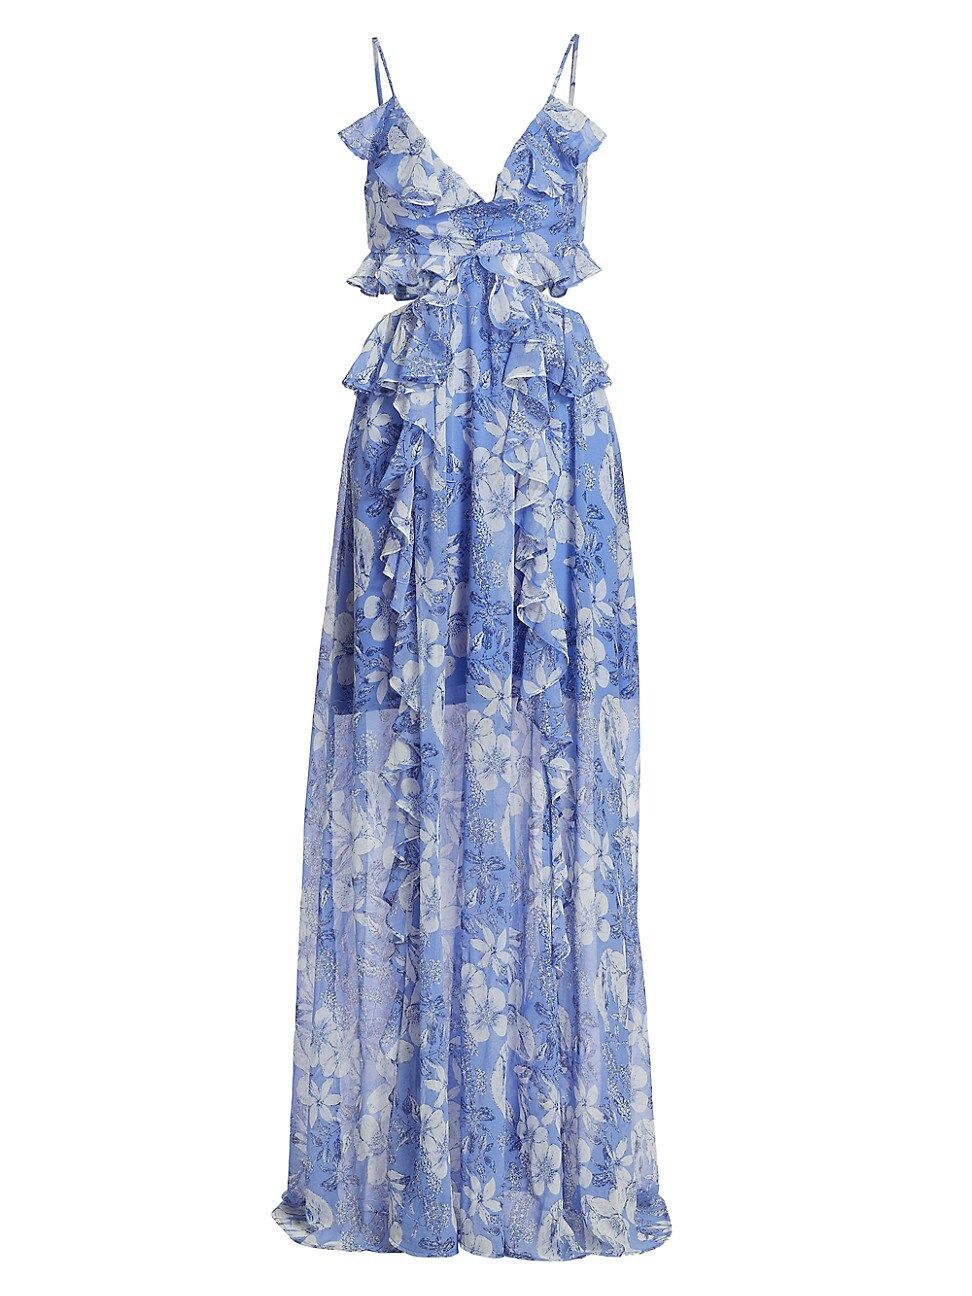 Women's Palace Floral-Printed Maxi Dress - Blue White Floral - Size XL - Blue White Floral - Size XL | Saks Fifth Avenue